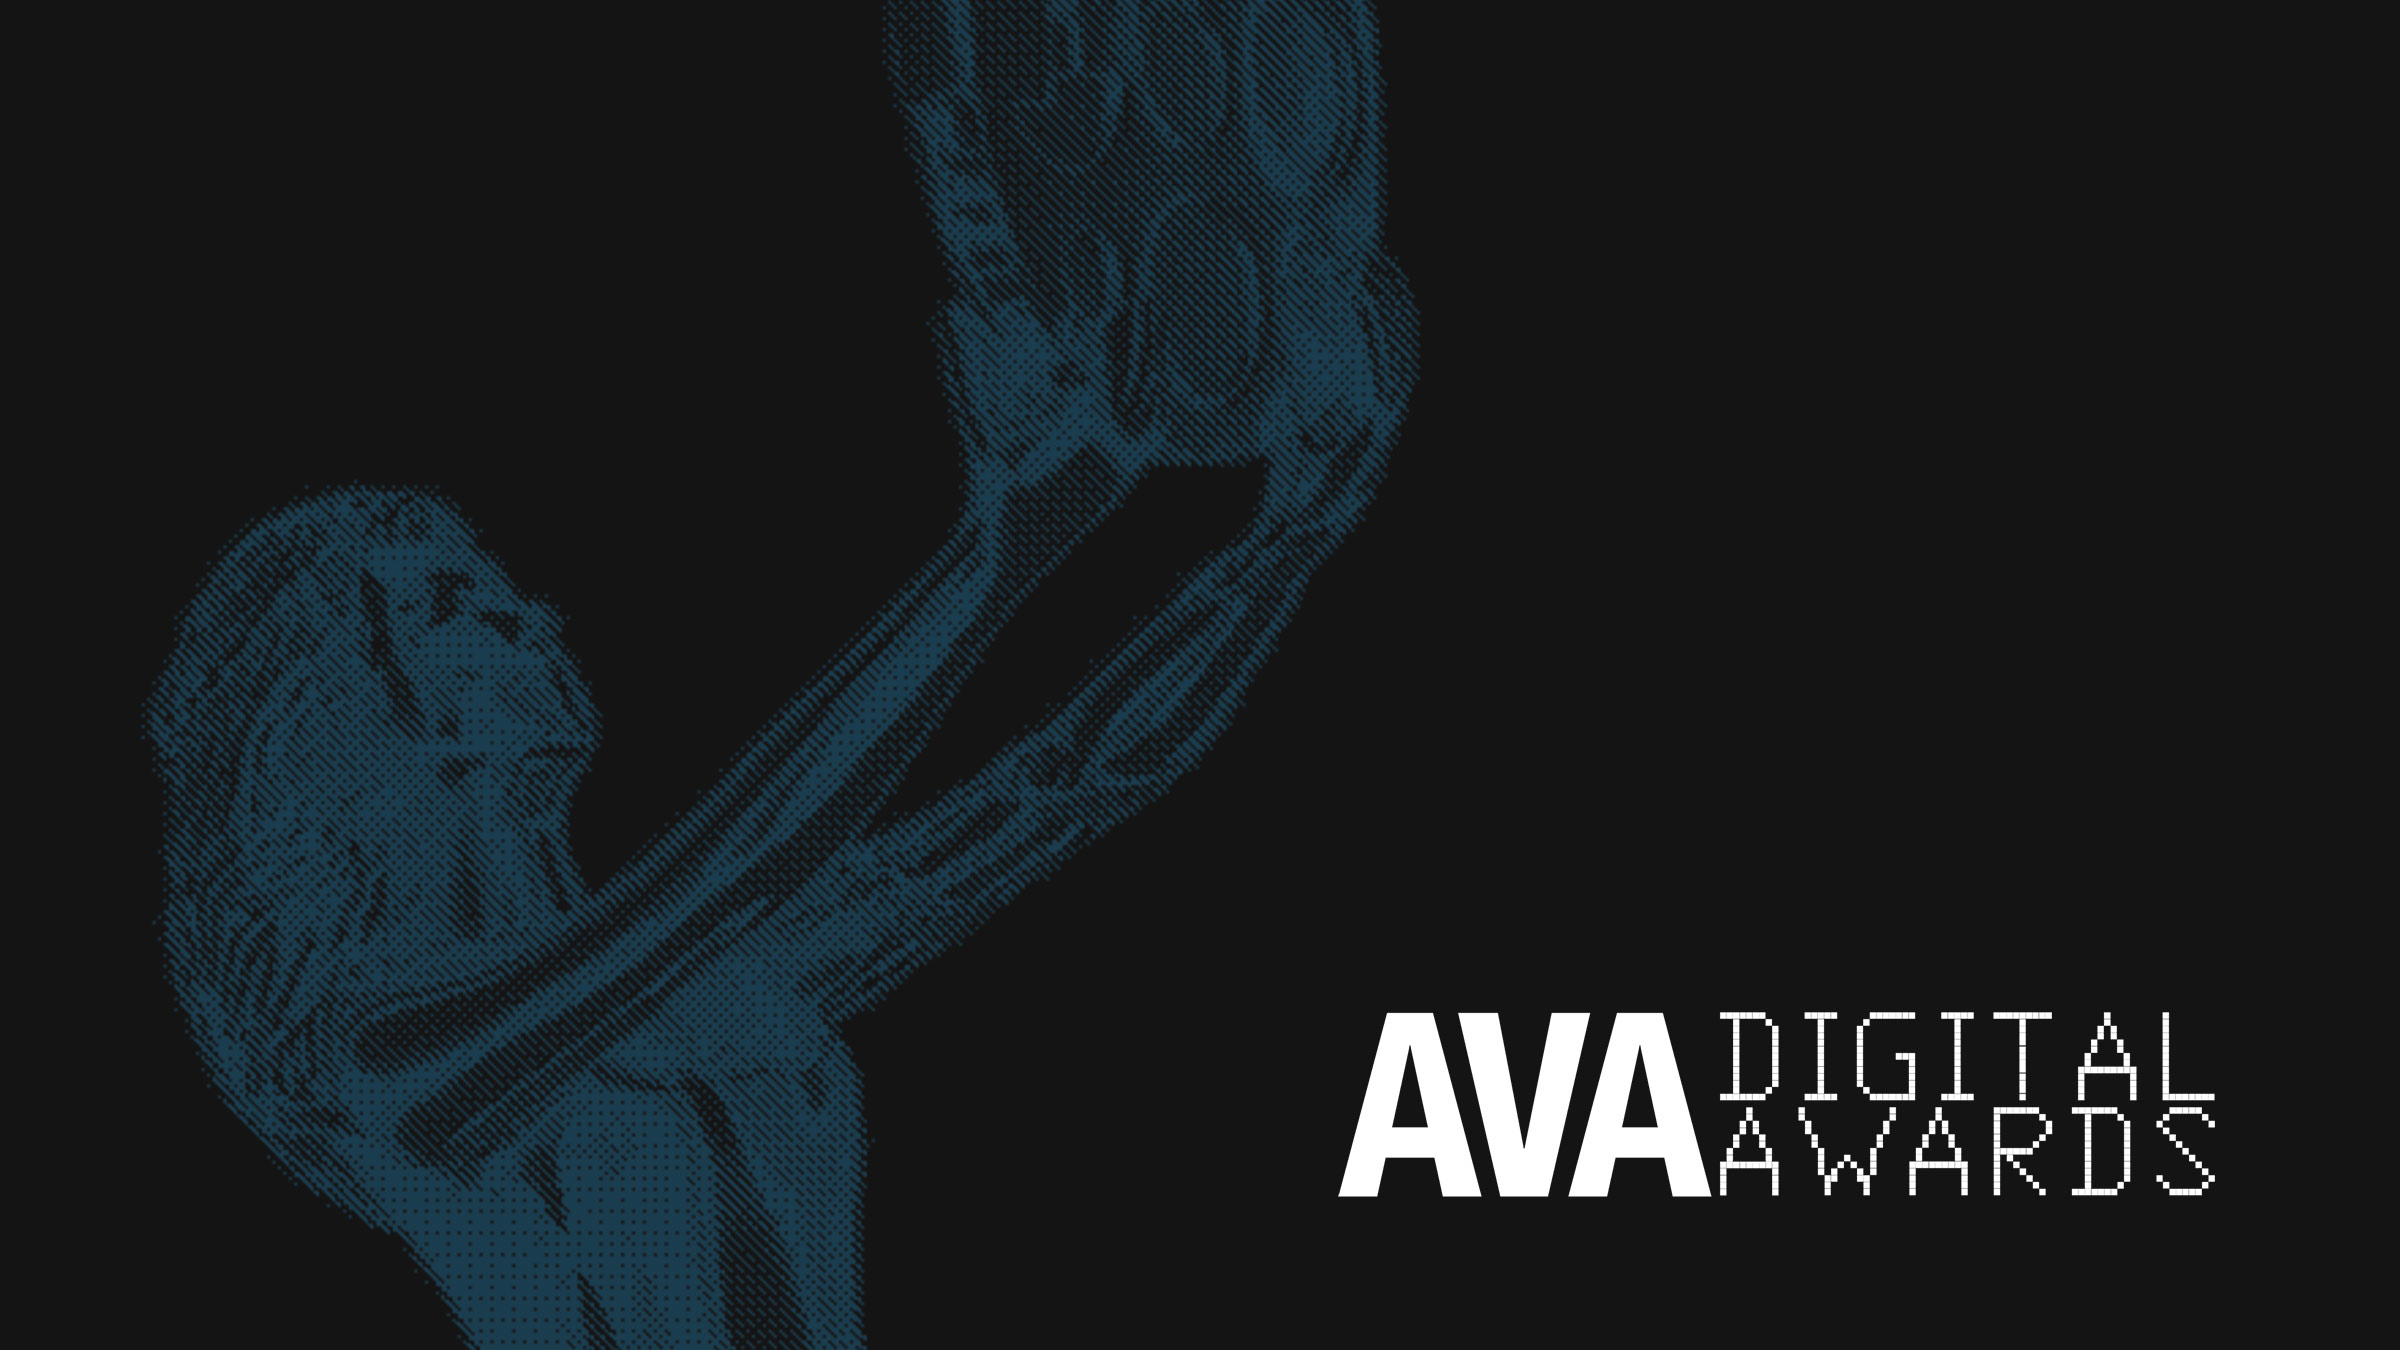 AVA Digital Awards logo and trophy graphic